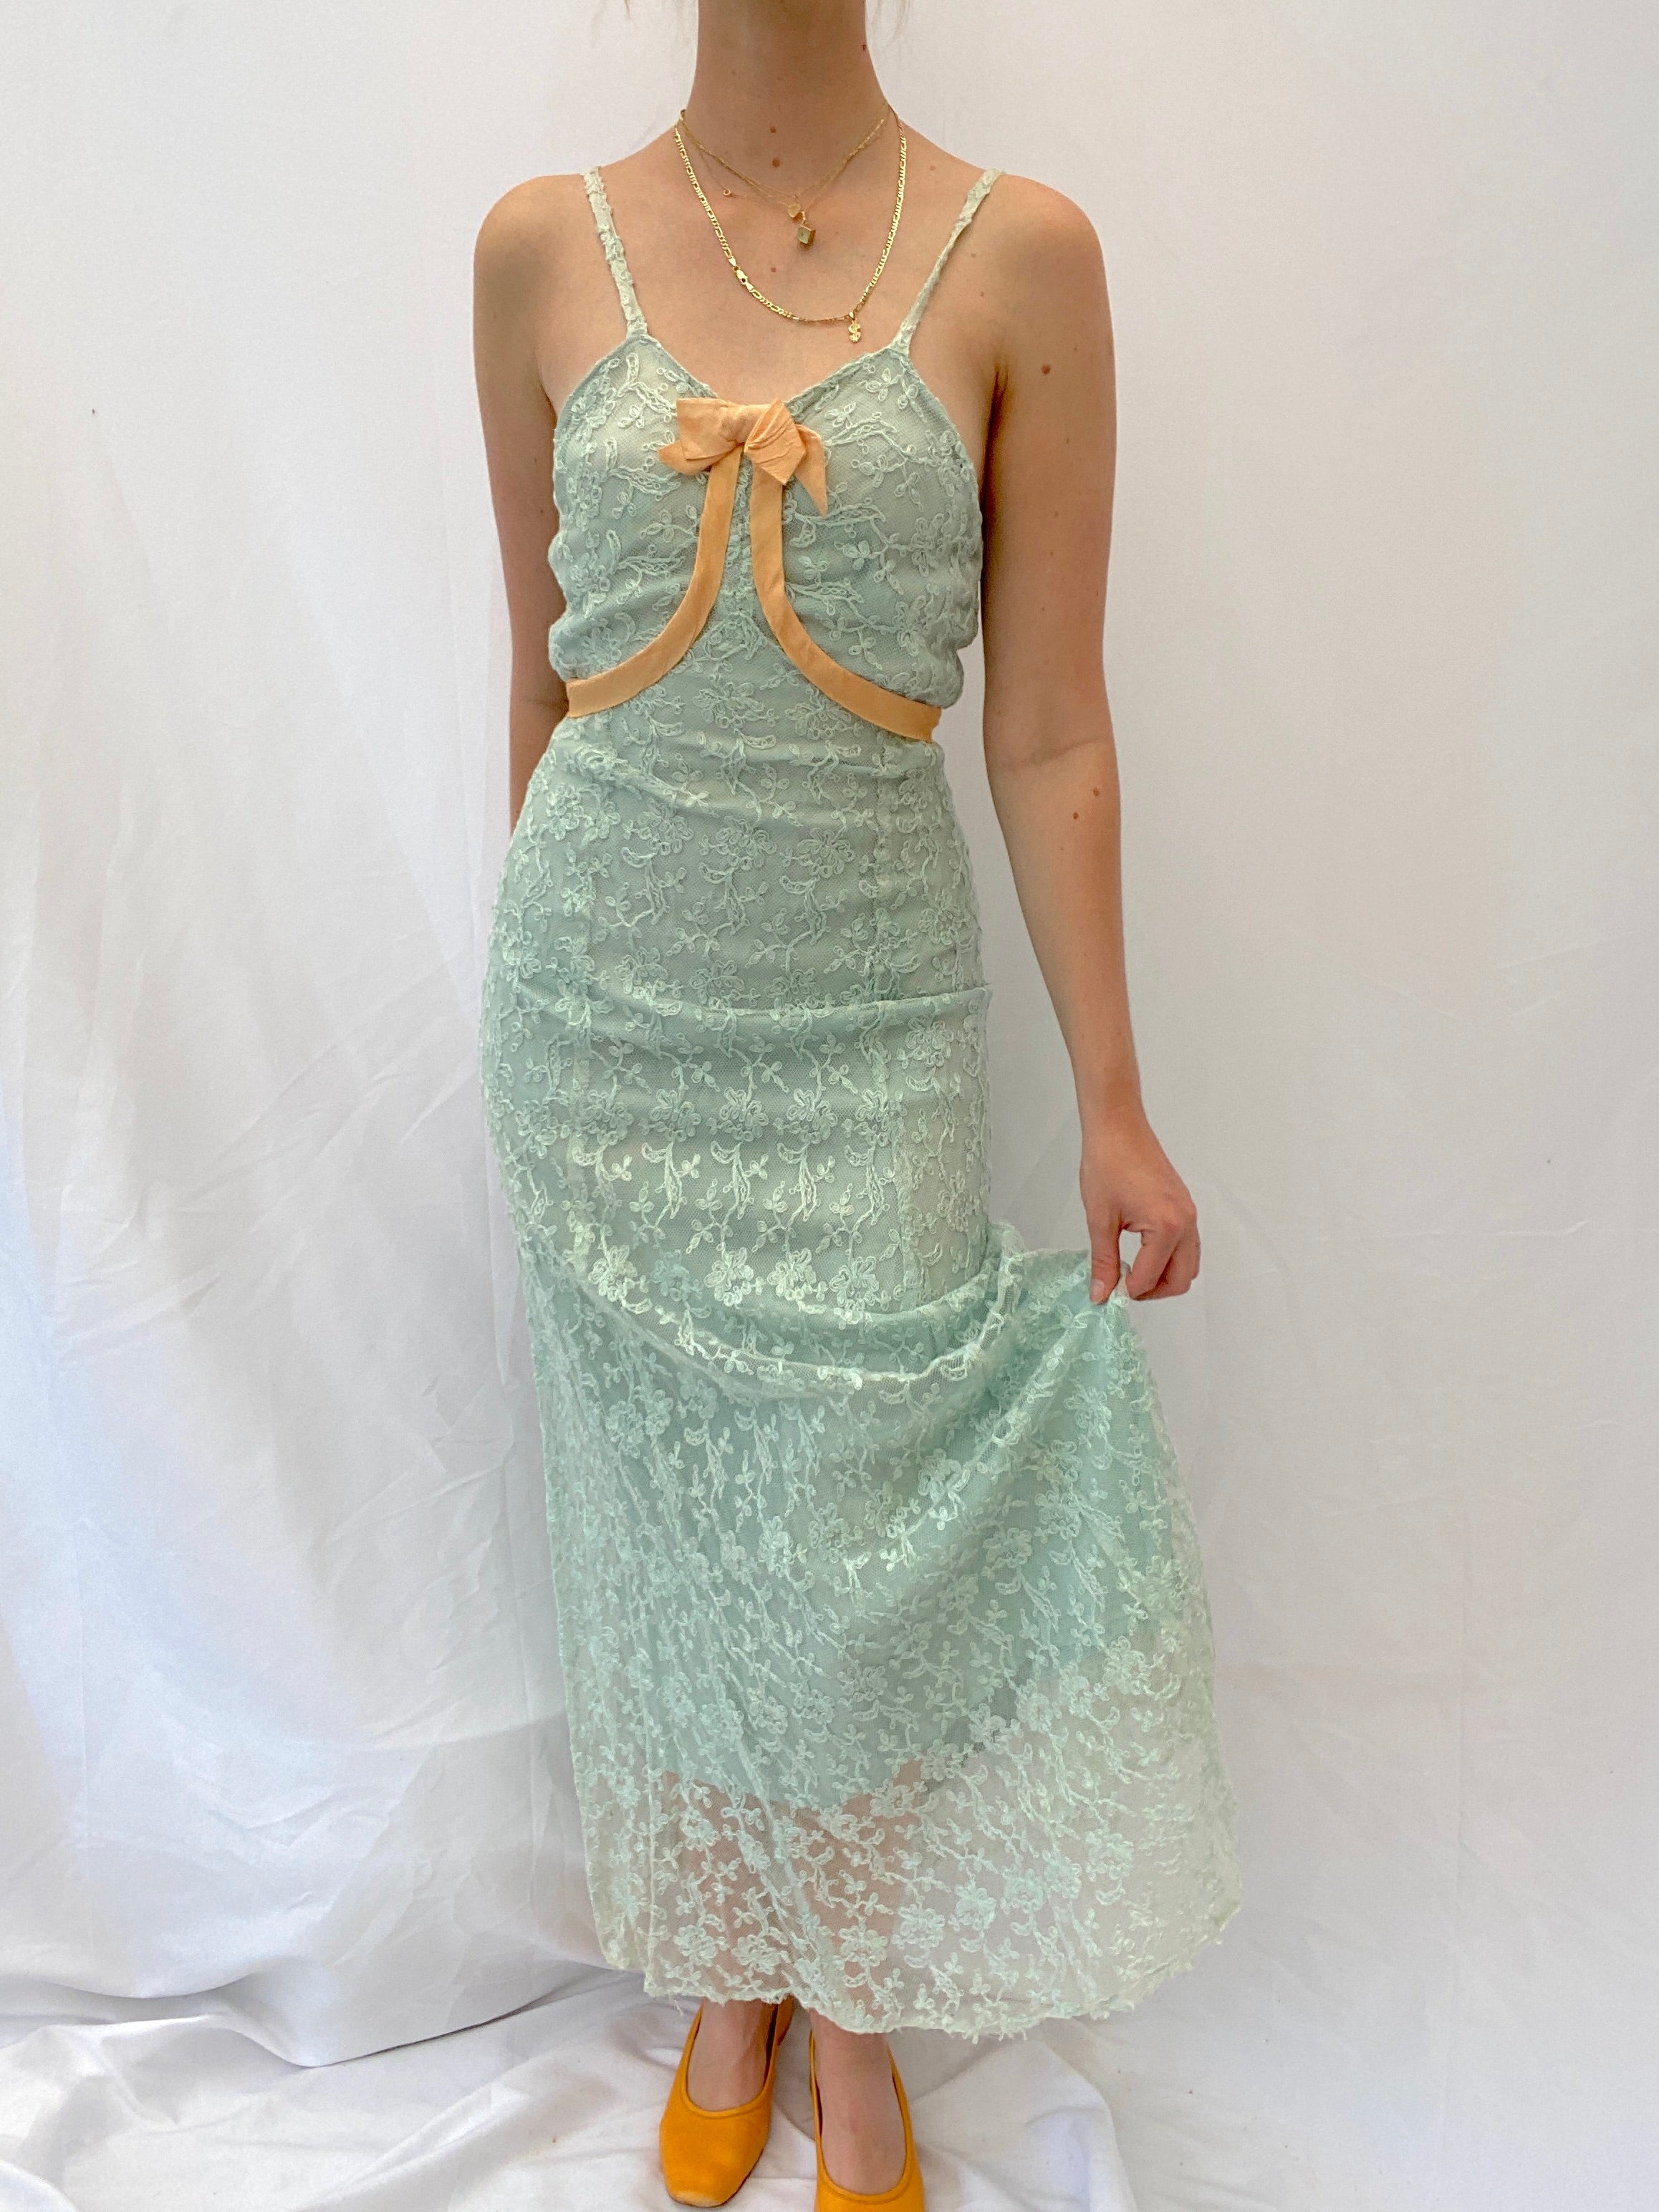 1940's Ocean Blue Lace Dress with Pink Satin Tie